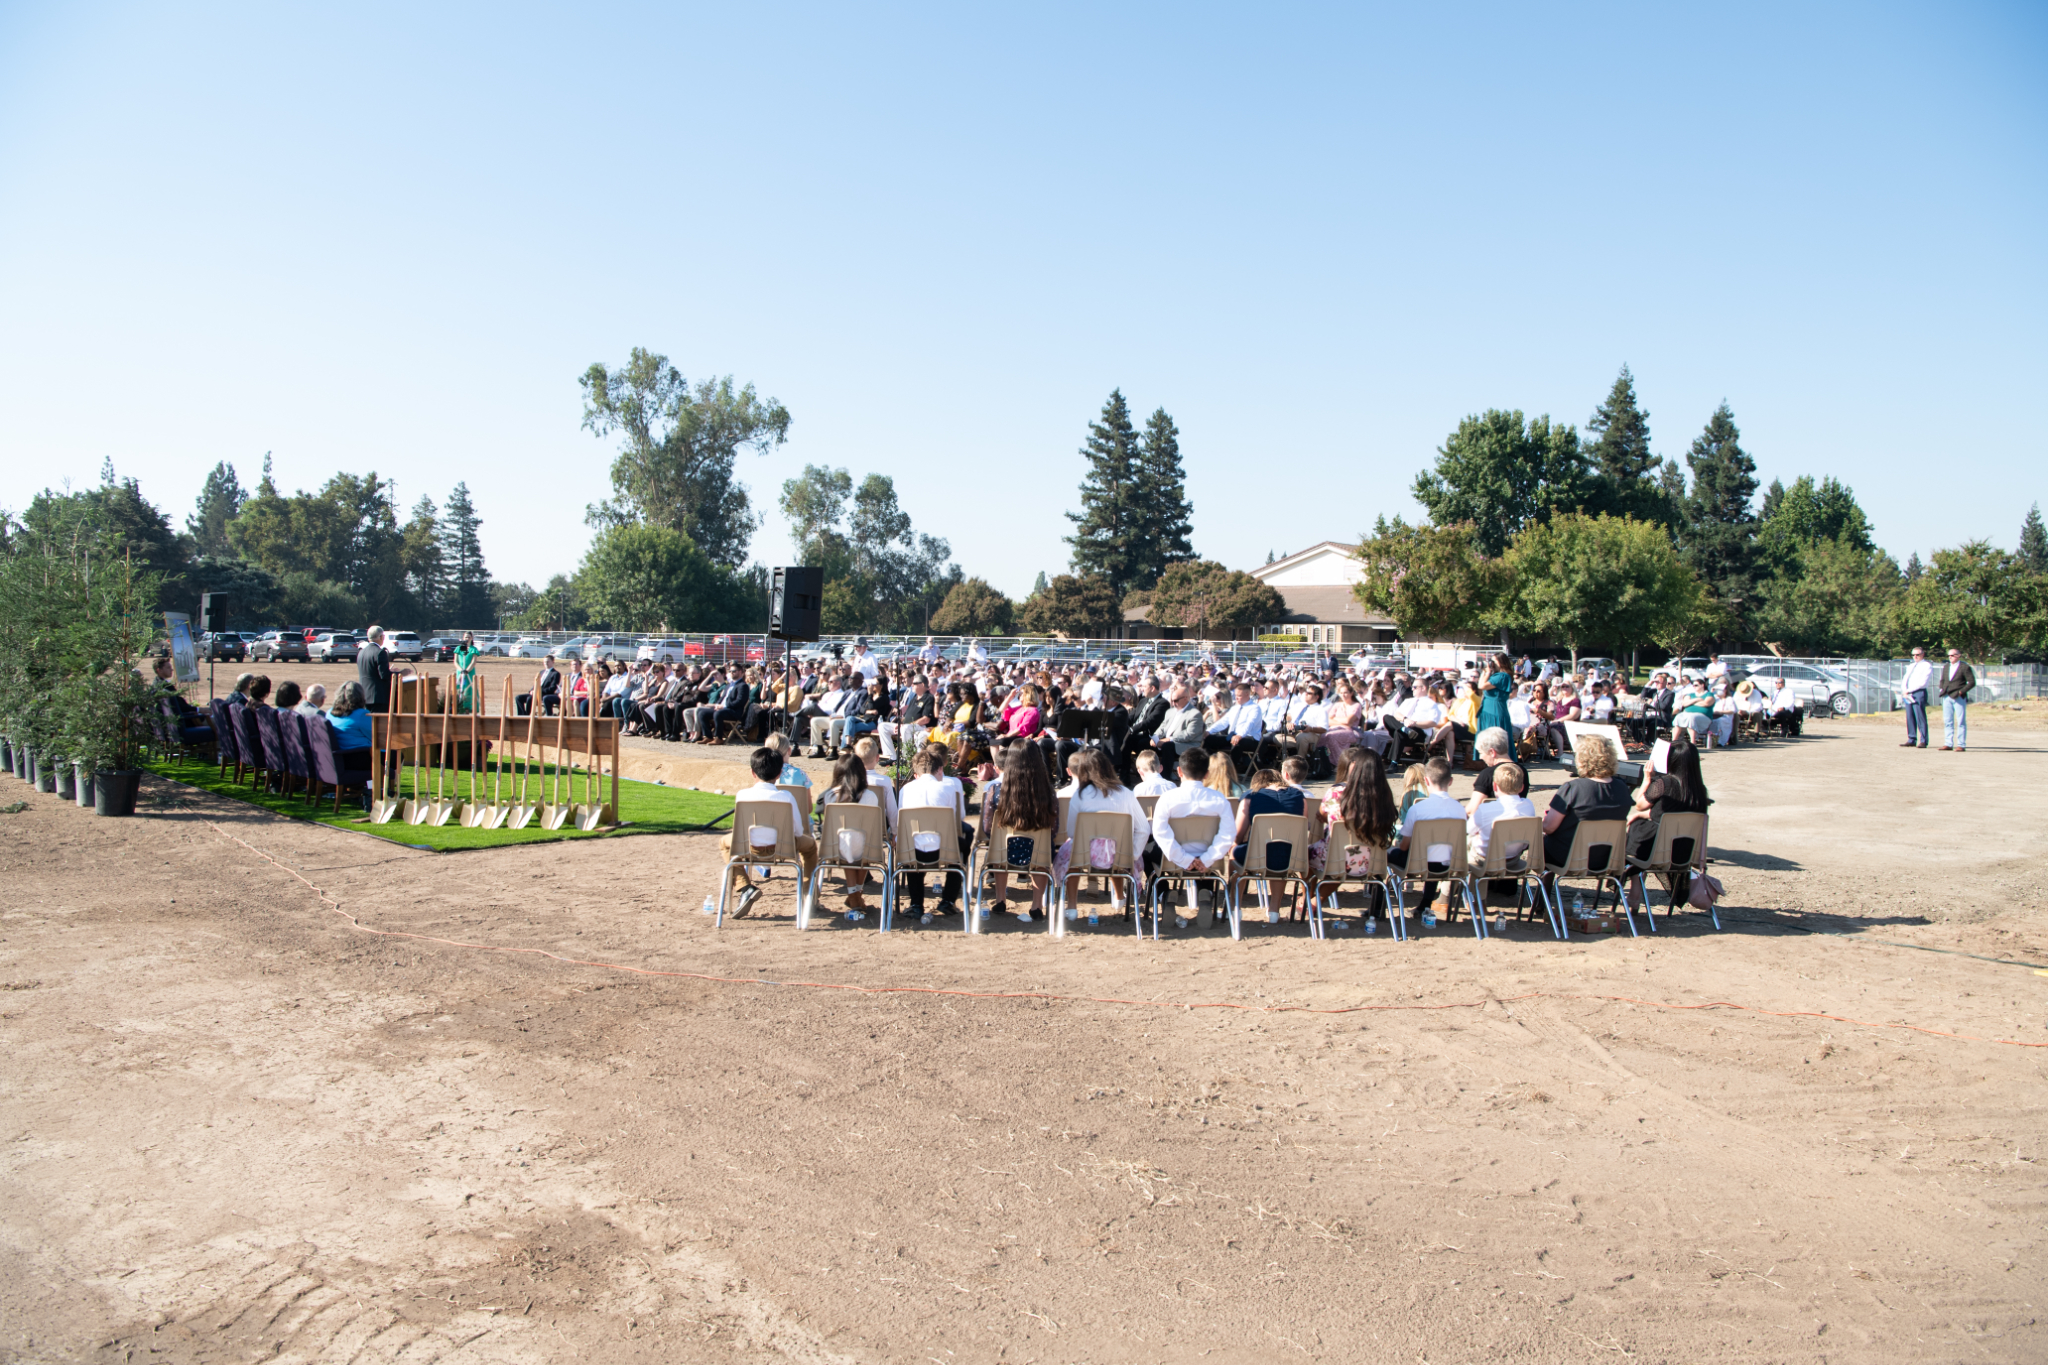 A large group of people wearing Sunday best and sitting outside in chairs on a dirt field.